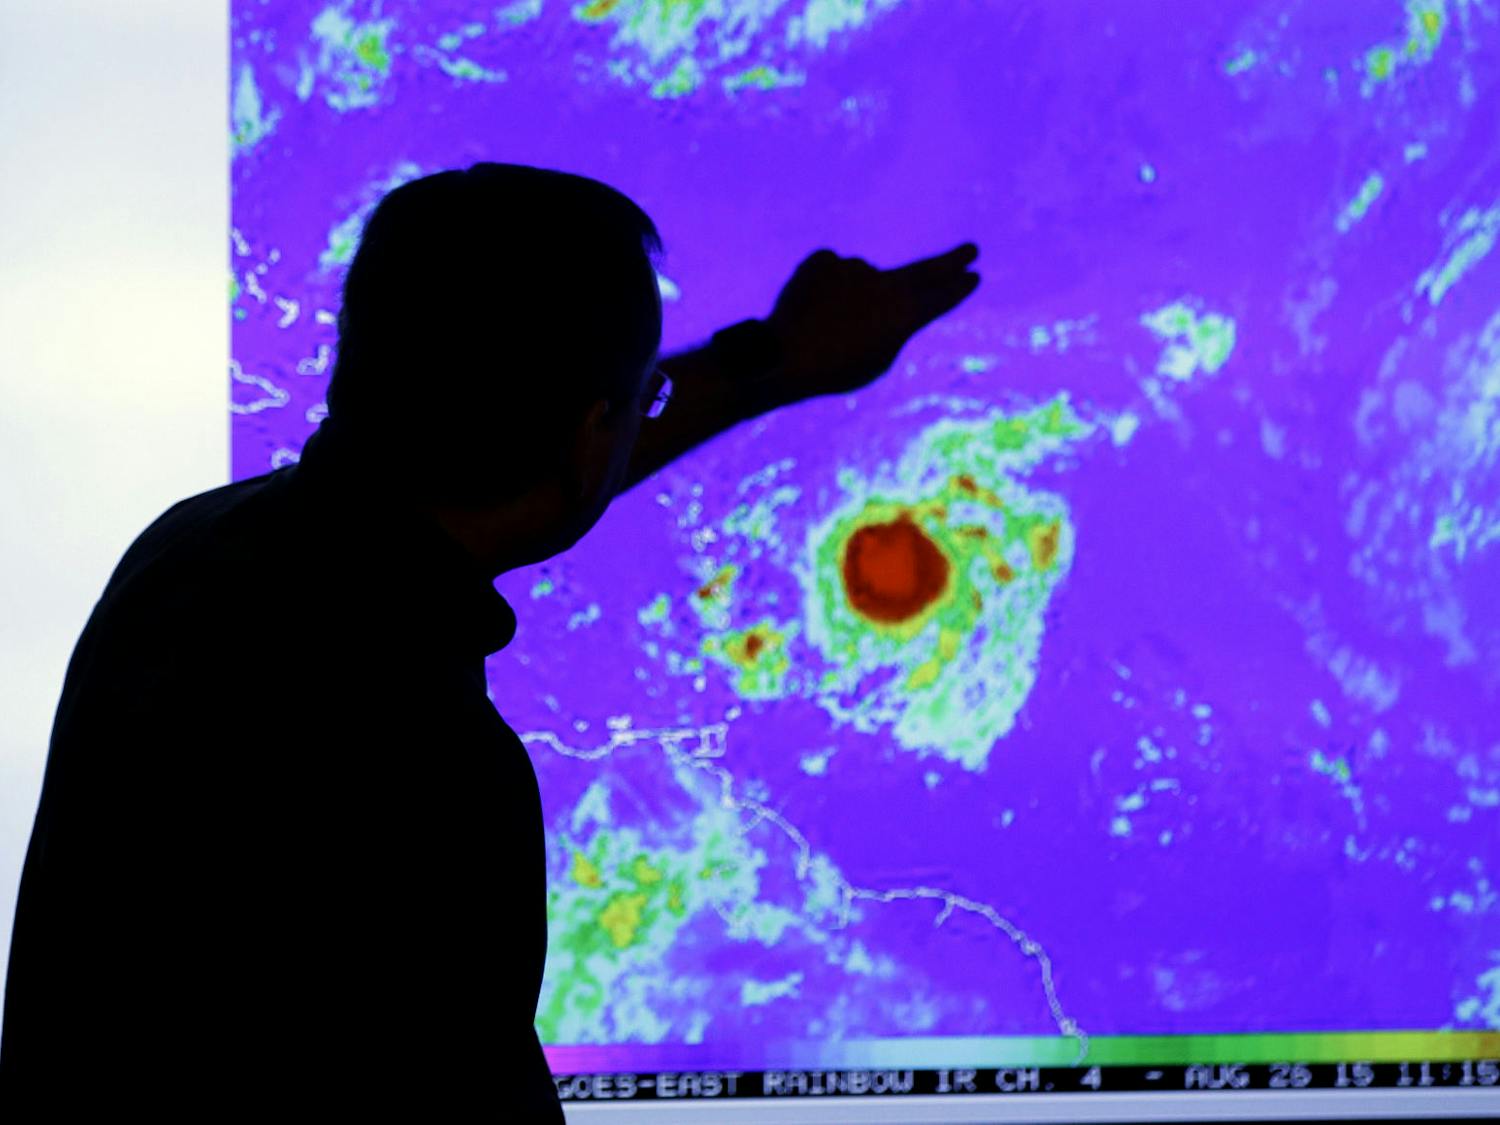 James Franklin, chief hurricane forecaster, looks at an image of Tropical Storm Erika as it moves westward towards islands in the eastern Caribbean, at the National Hurricane Center, Wednesday, Aug. 26, 2015, in Miami.